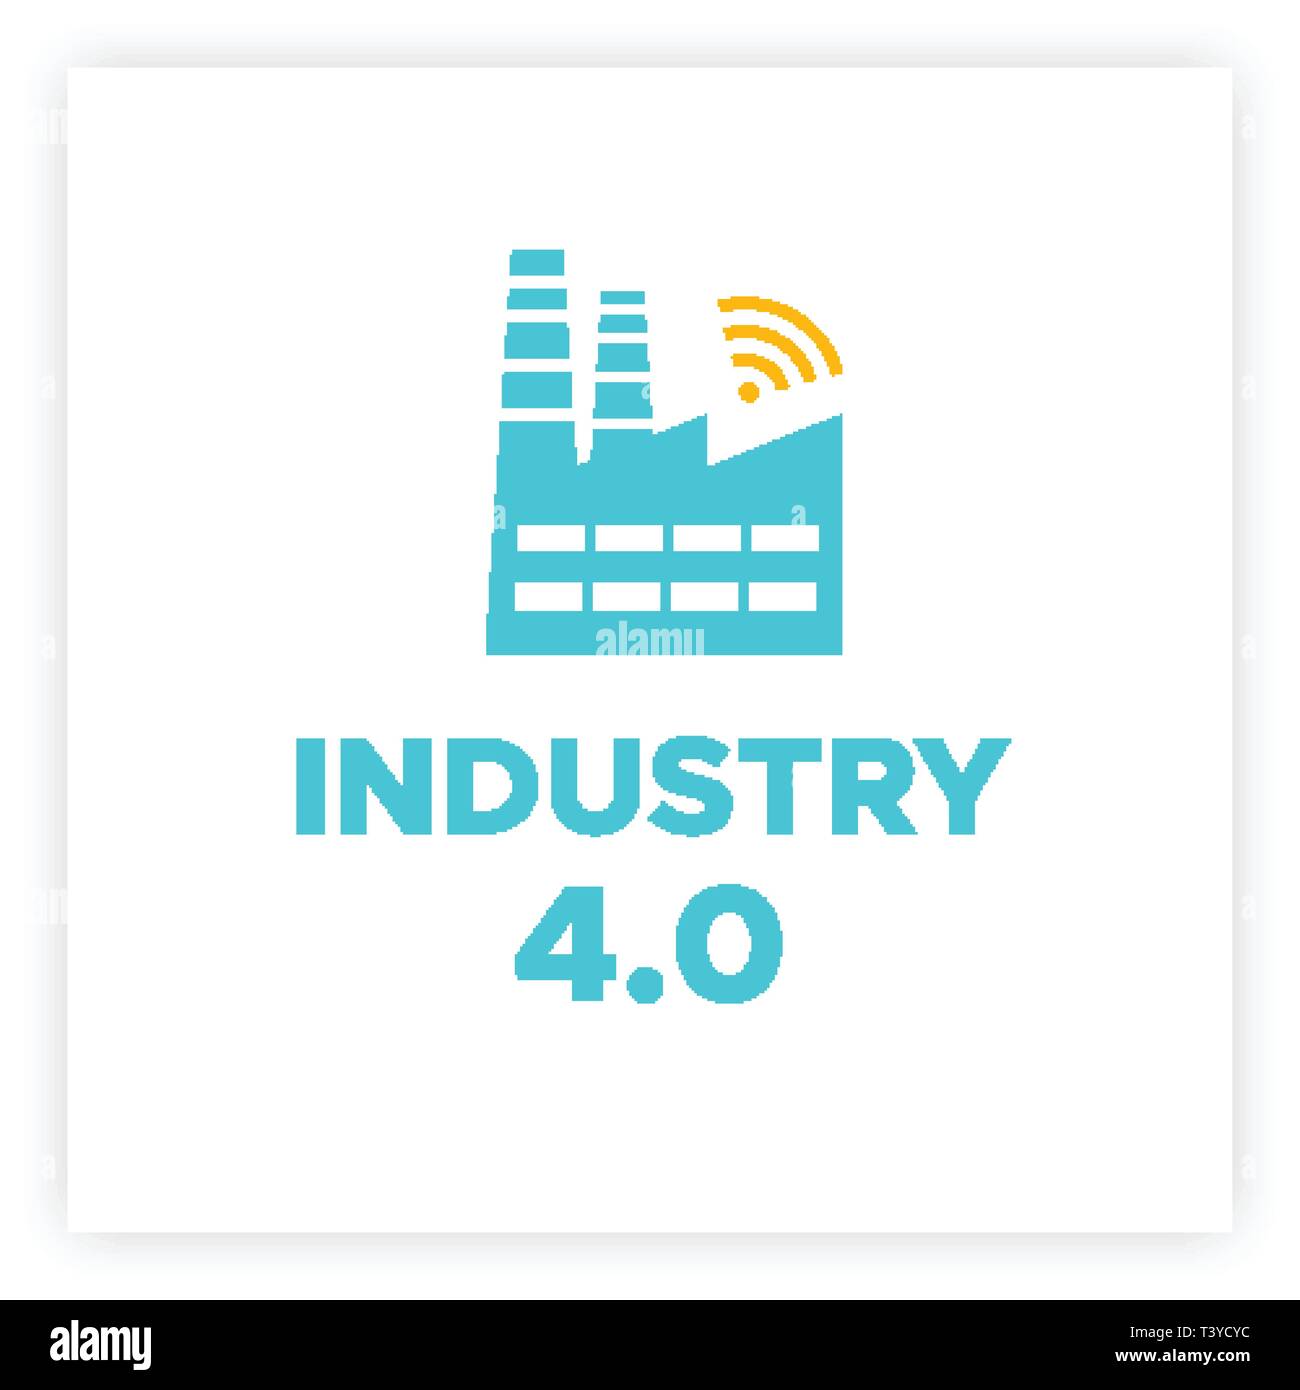 Manufacturing industry 4.0 revolution concept vector illustration. Blue factory icon with wireless symbol and sign INDUSTRY 4.0 Smart technology and automation technology revolution business concept. Stock Vector